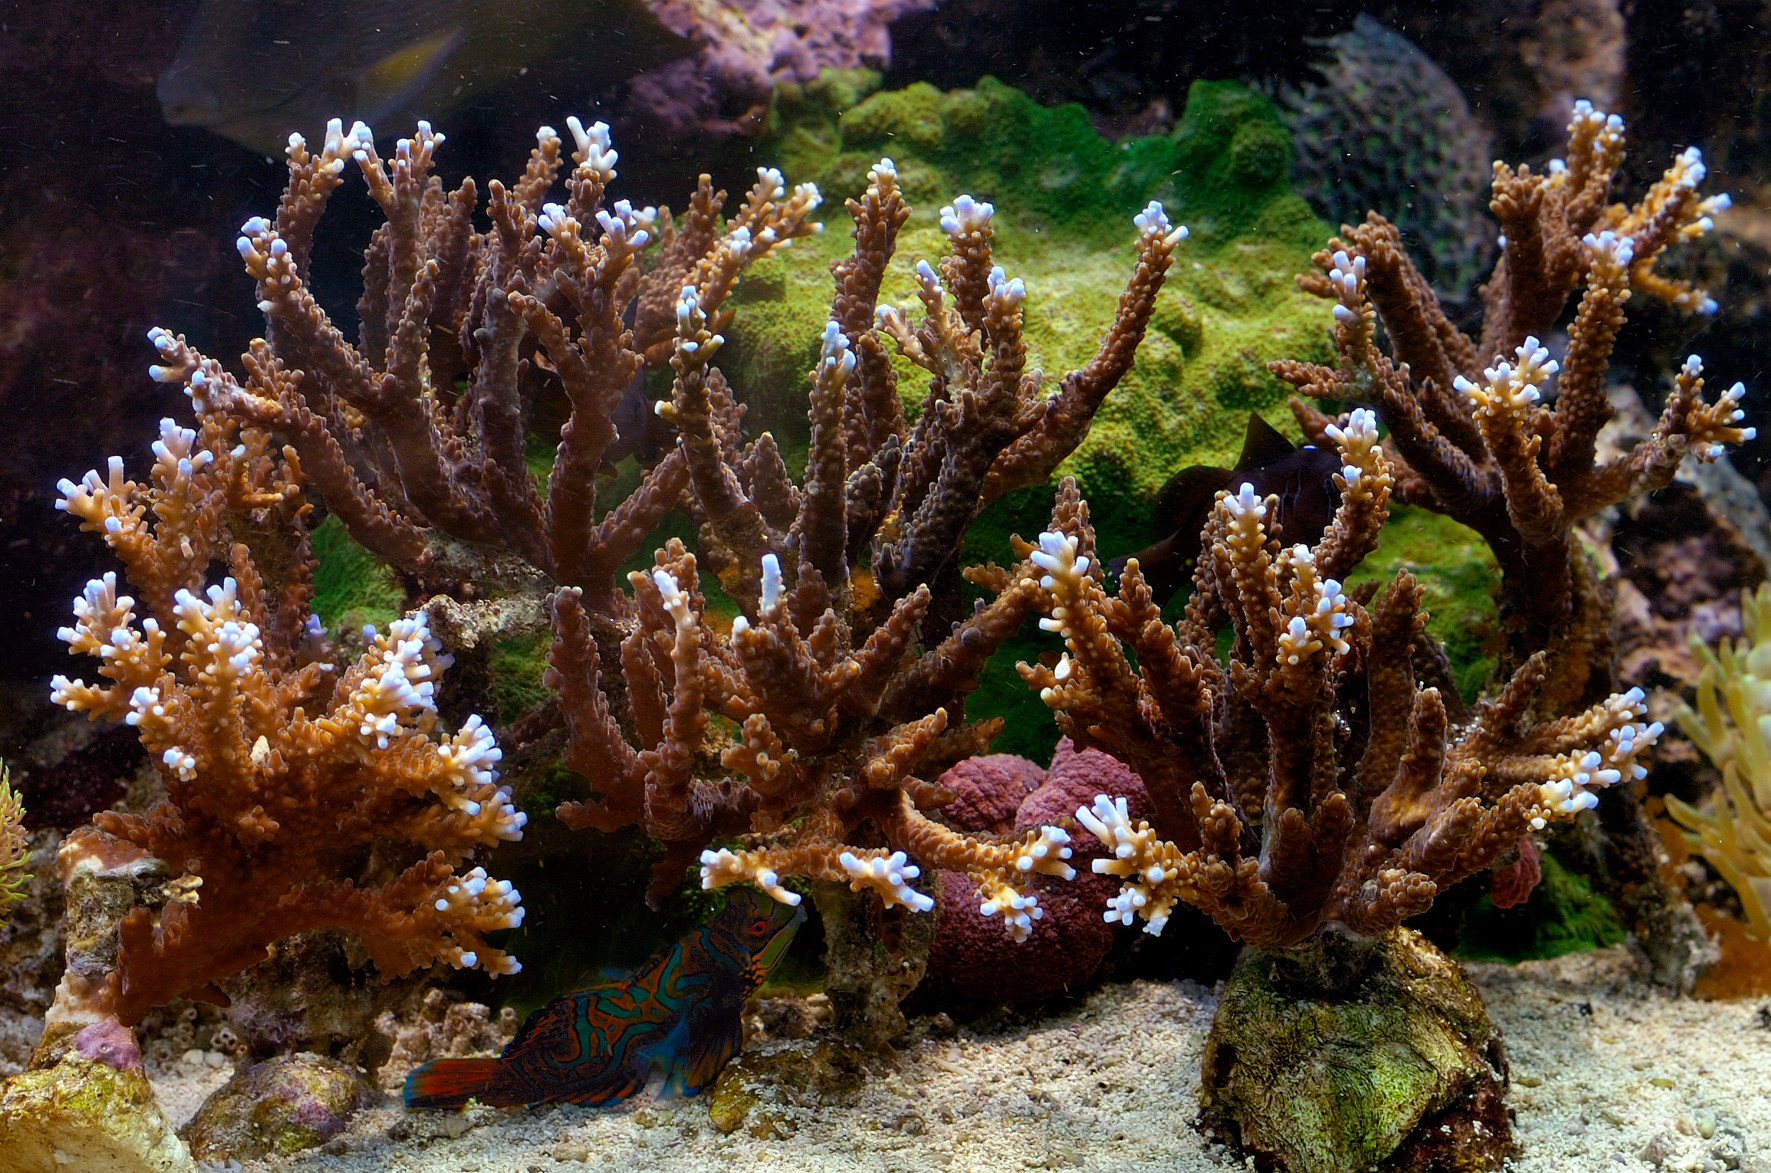 Reddish Acropora coral species with white buds on top growing in an aquarium